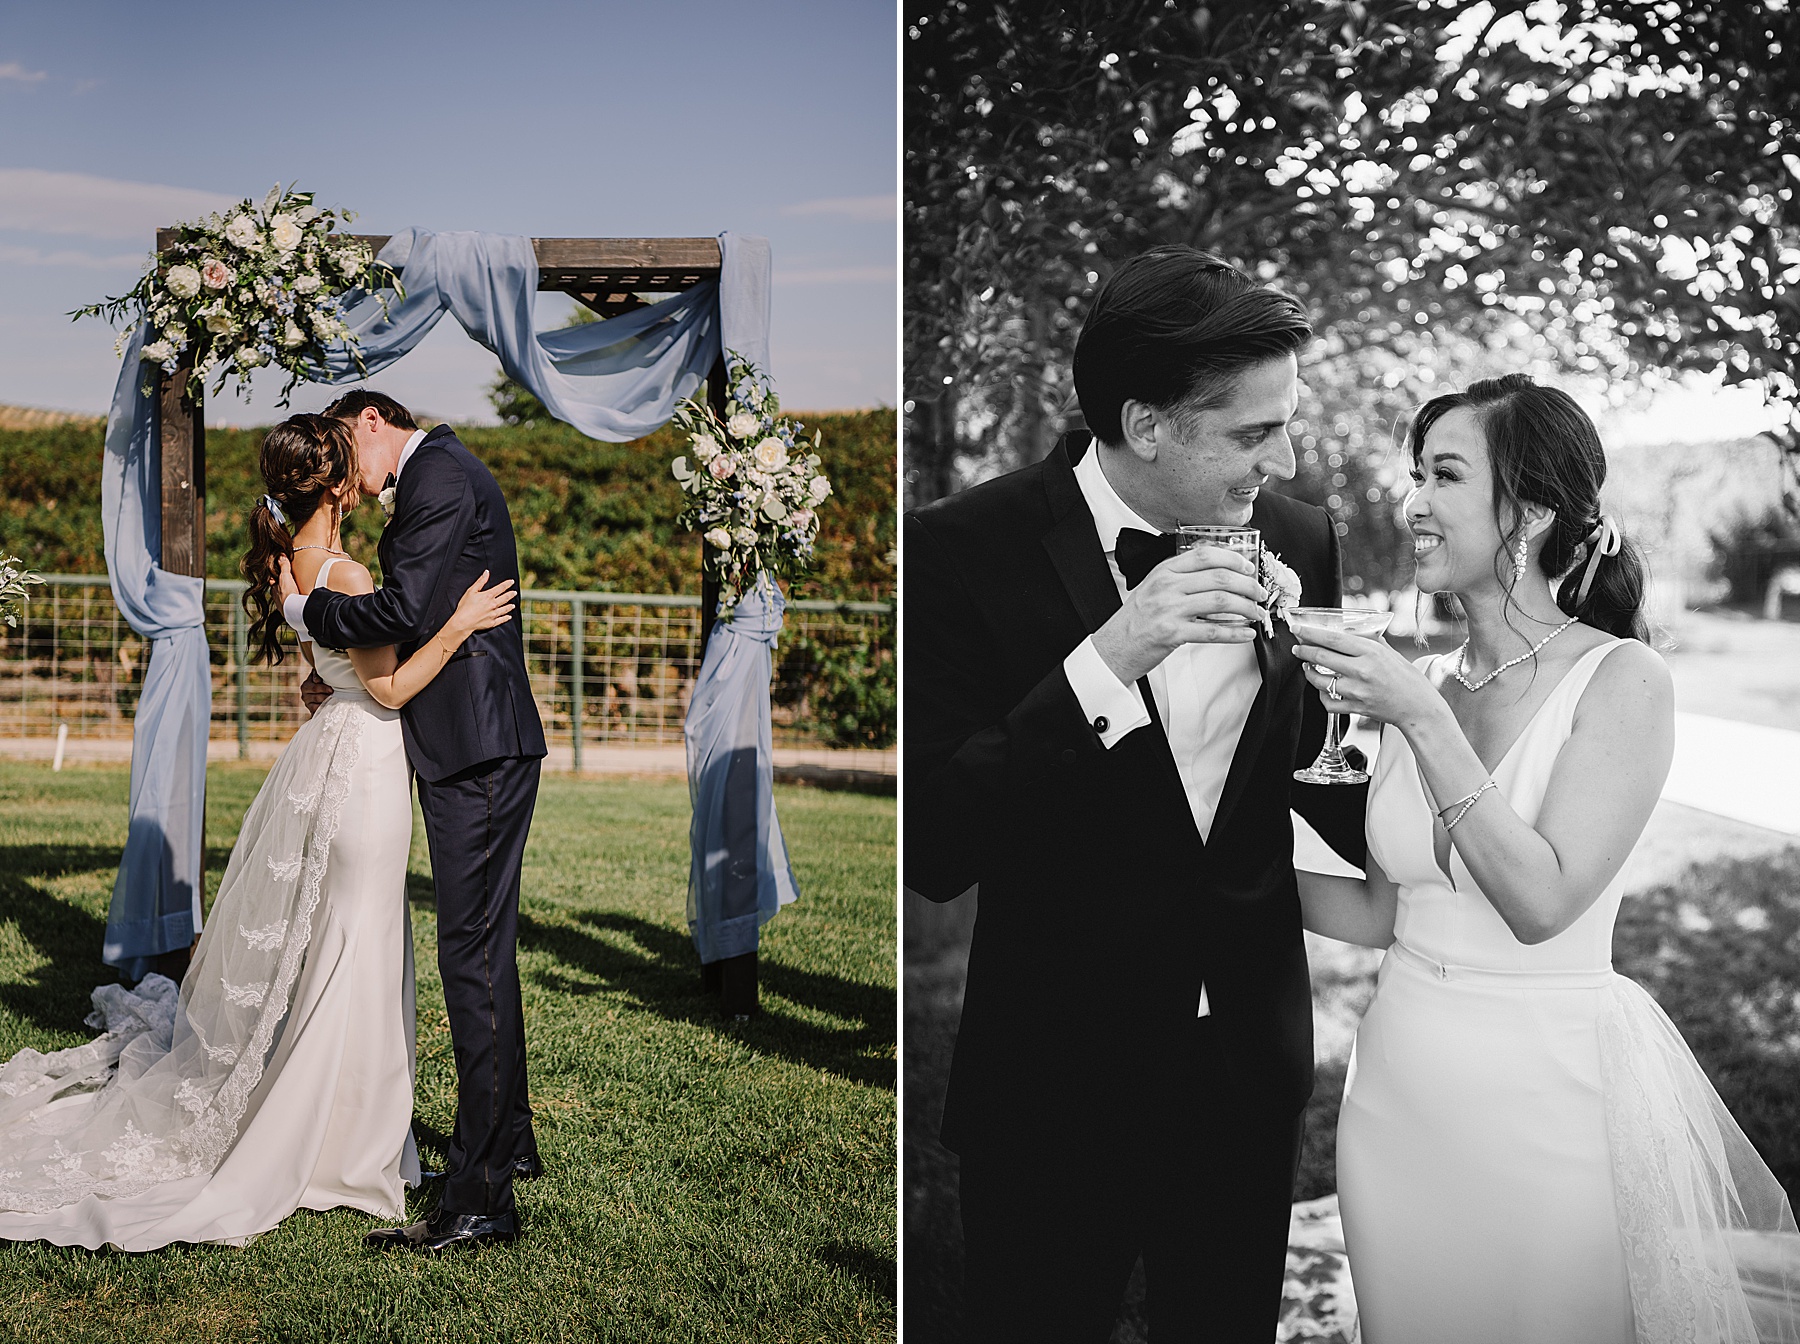 Nikkels Photography shares inspiration for an intimate wedding at Bella Terra, a new wedding venue in SLO county.